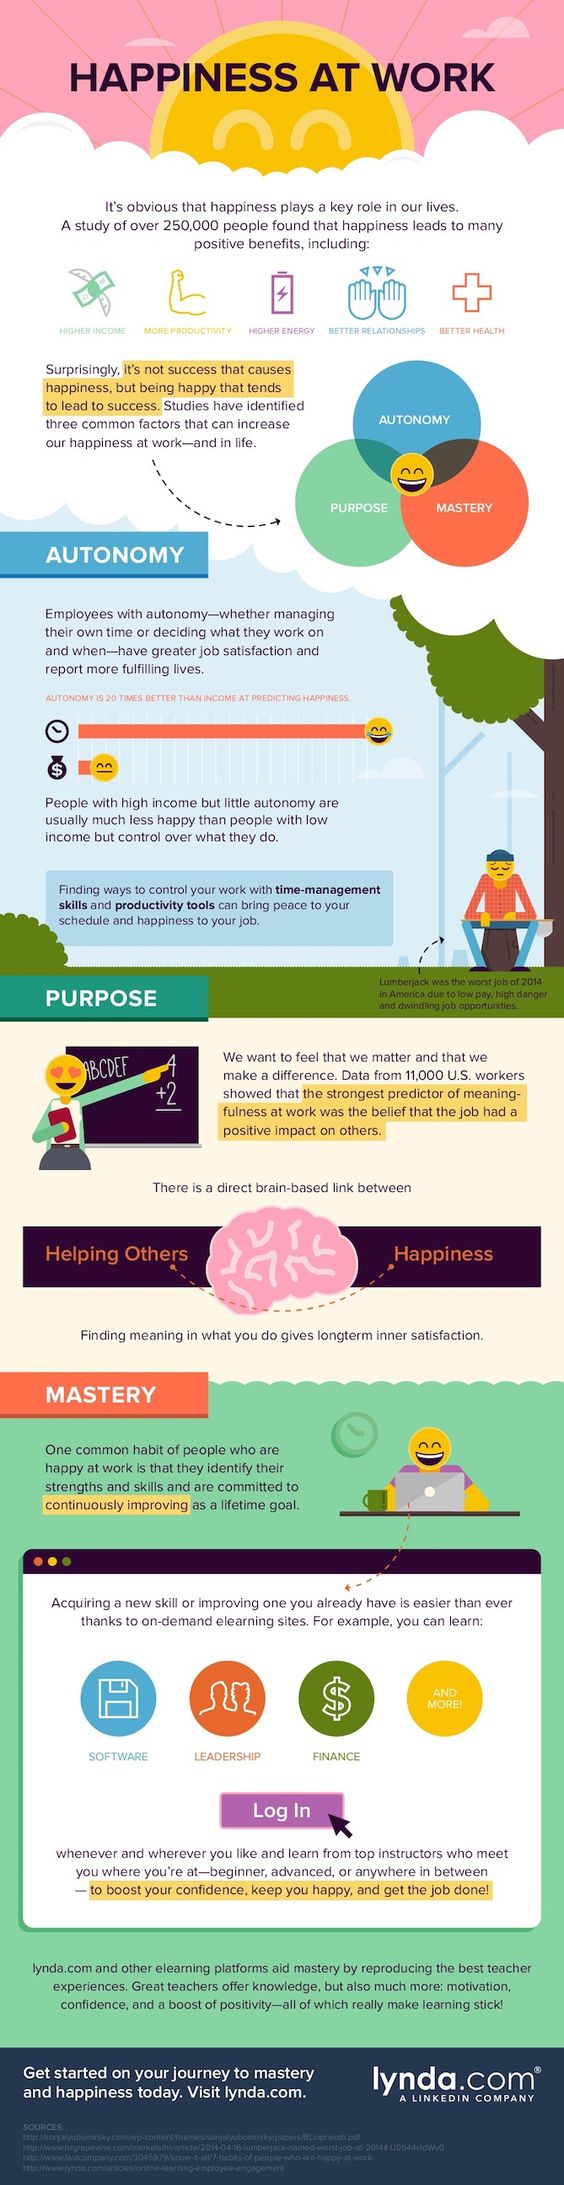 Want Happier Employees? Focus on These 3 Things [Infographic]